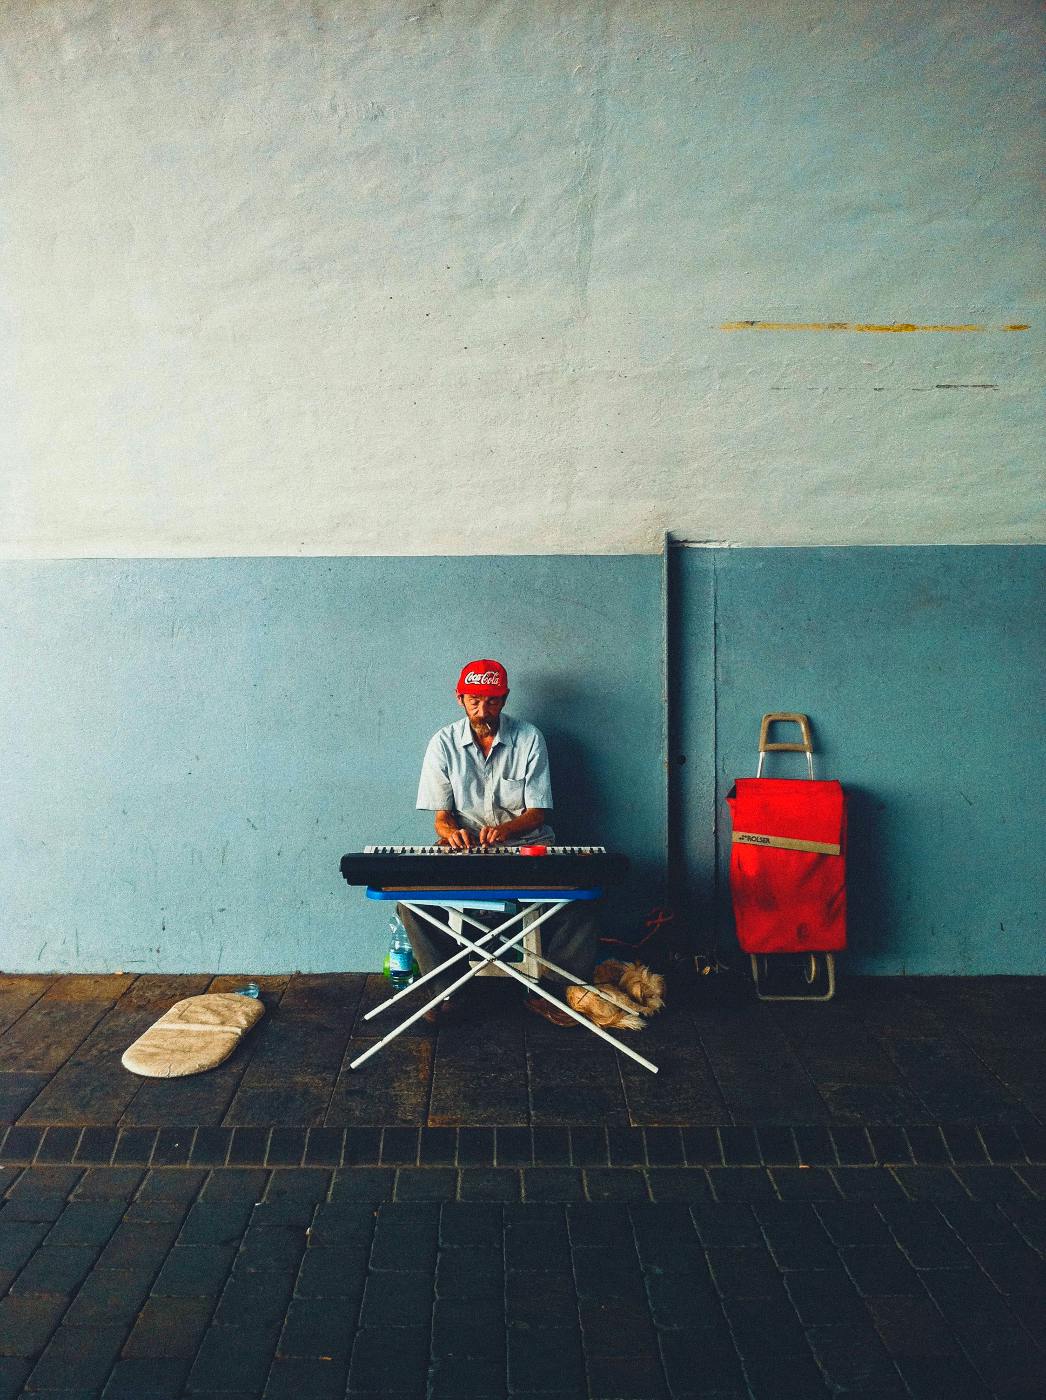 A guy playing keyboard on the street